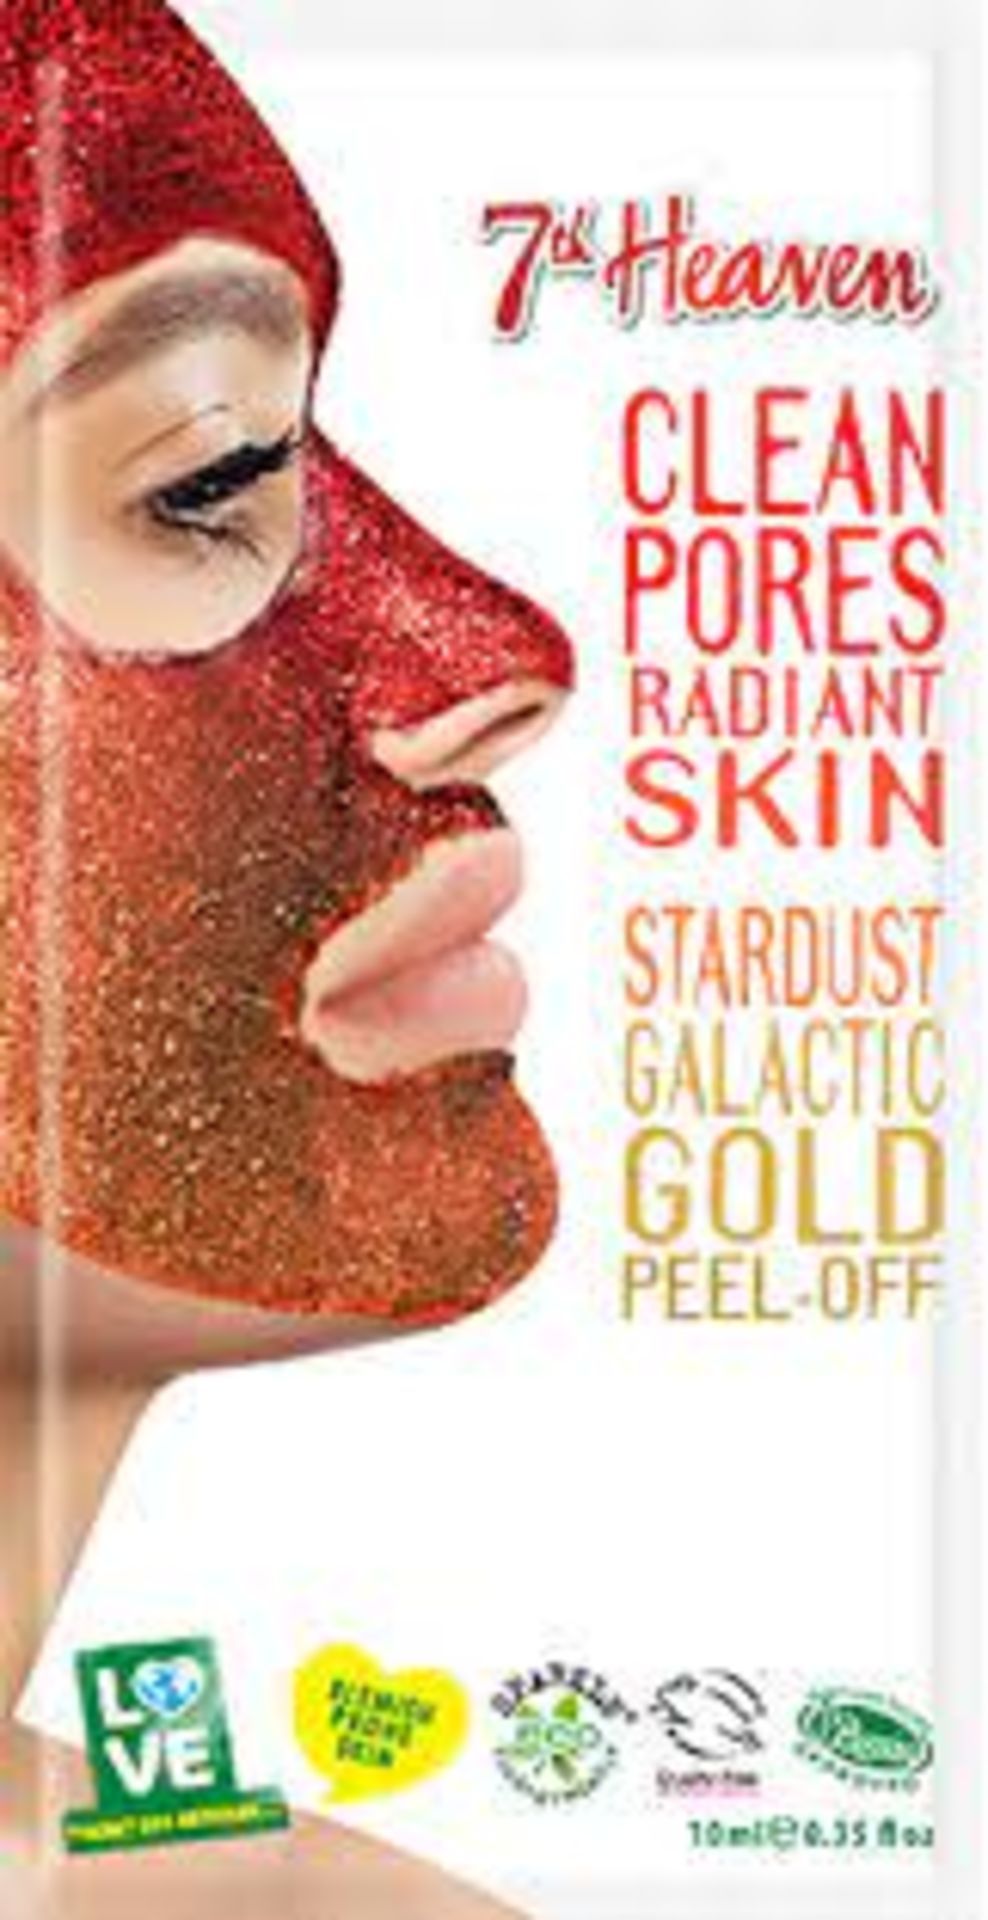 25 x Brand NEW Stardust Galactic Gold 7th Heaven Mask - PW